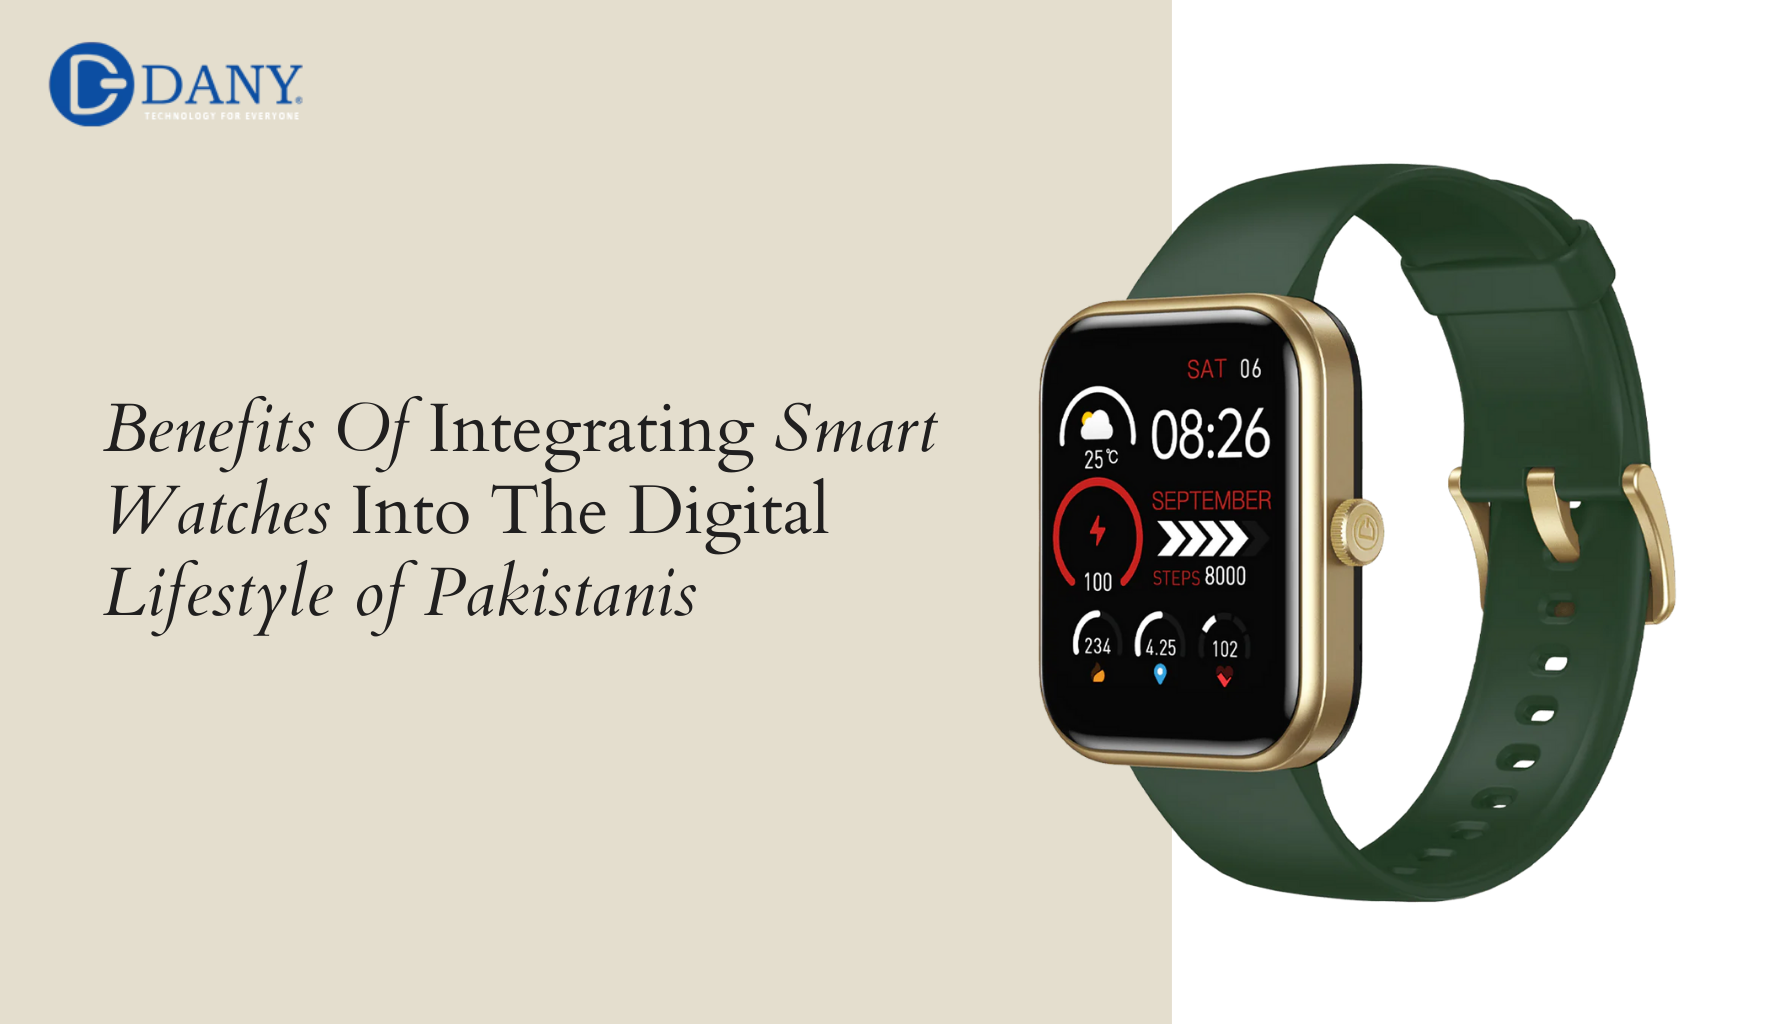 Benefits Of Integrating Smart Watches Into The Digital Lifestyle of Pakistanis